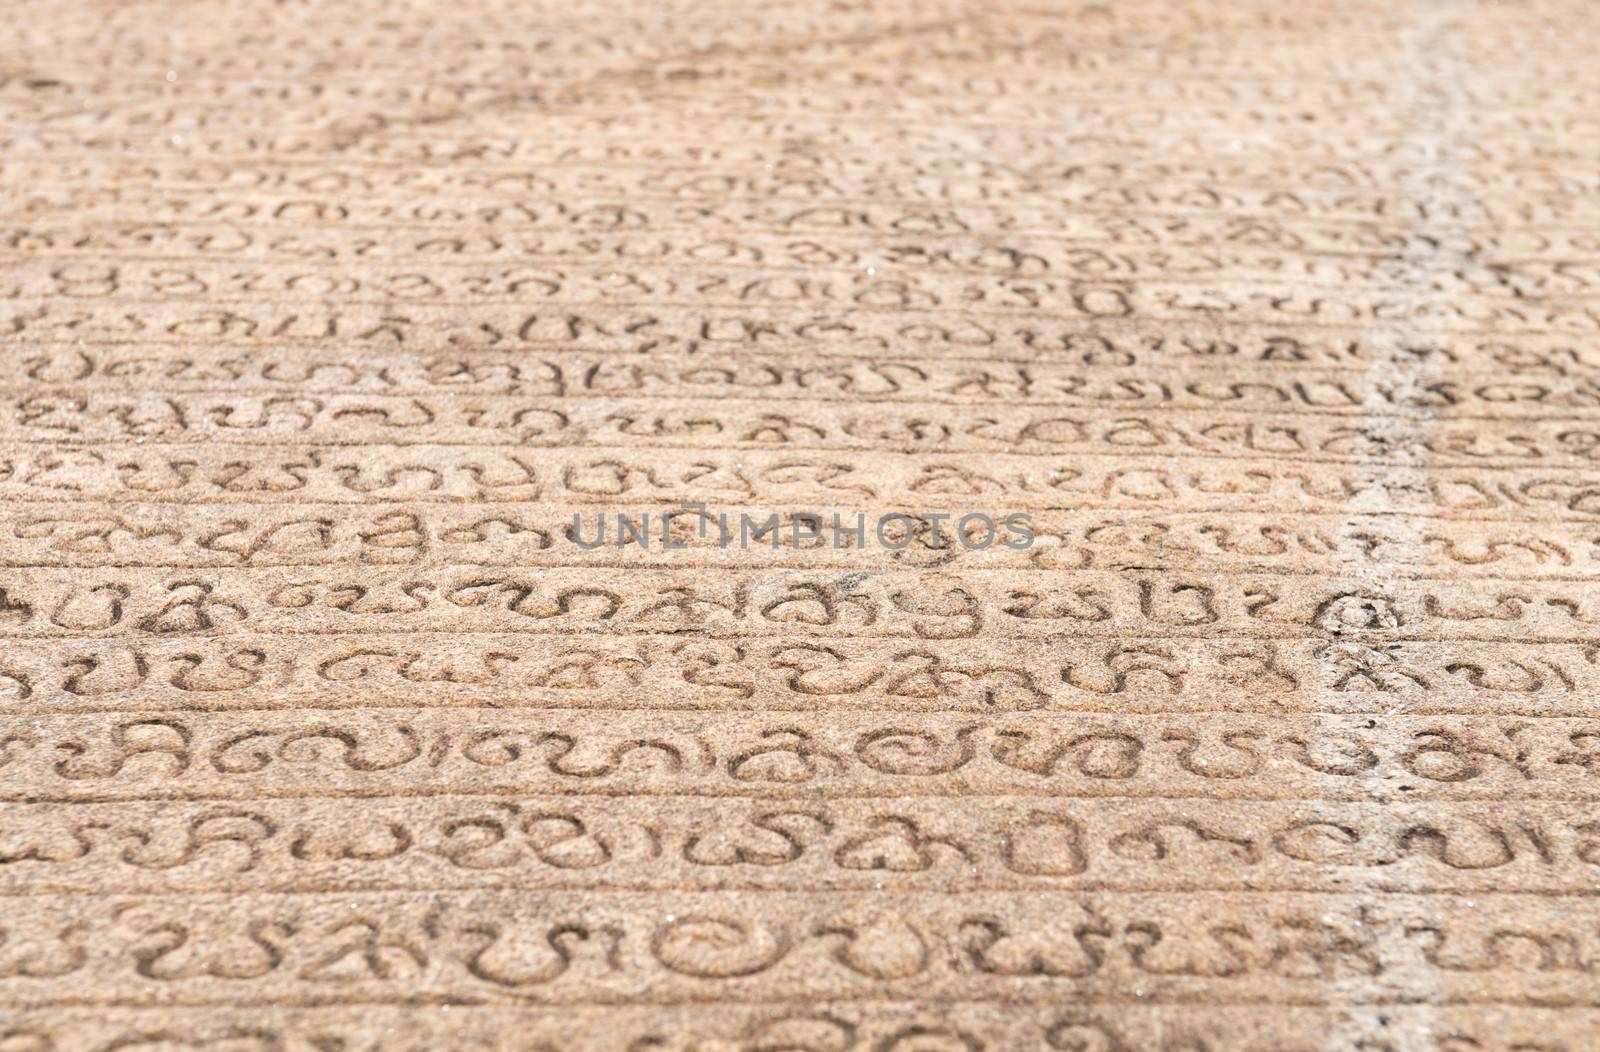 Ancient stone book with Singala characters script inscription, Polonnaruwa